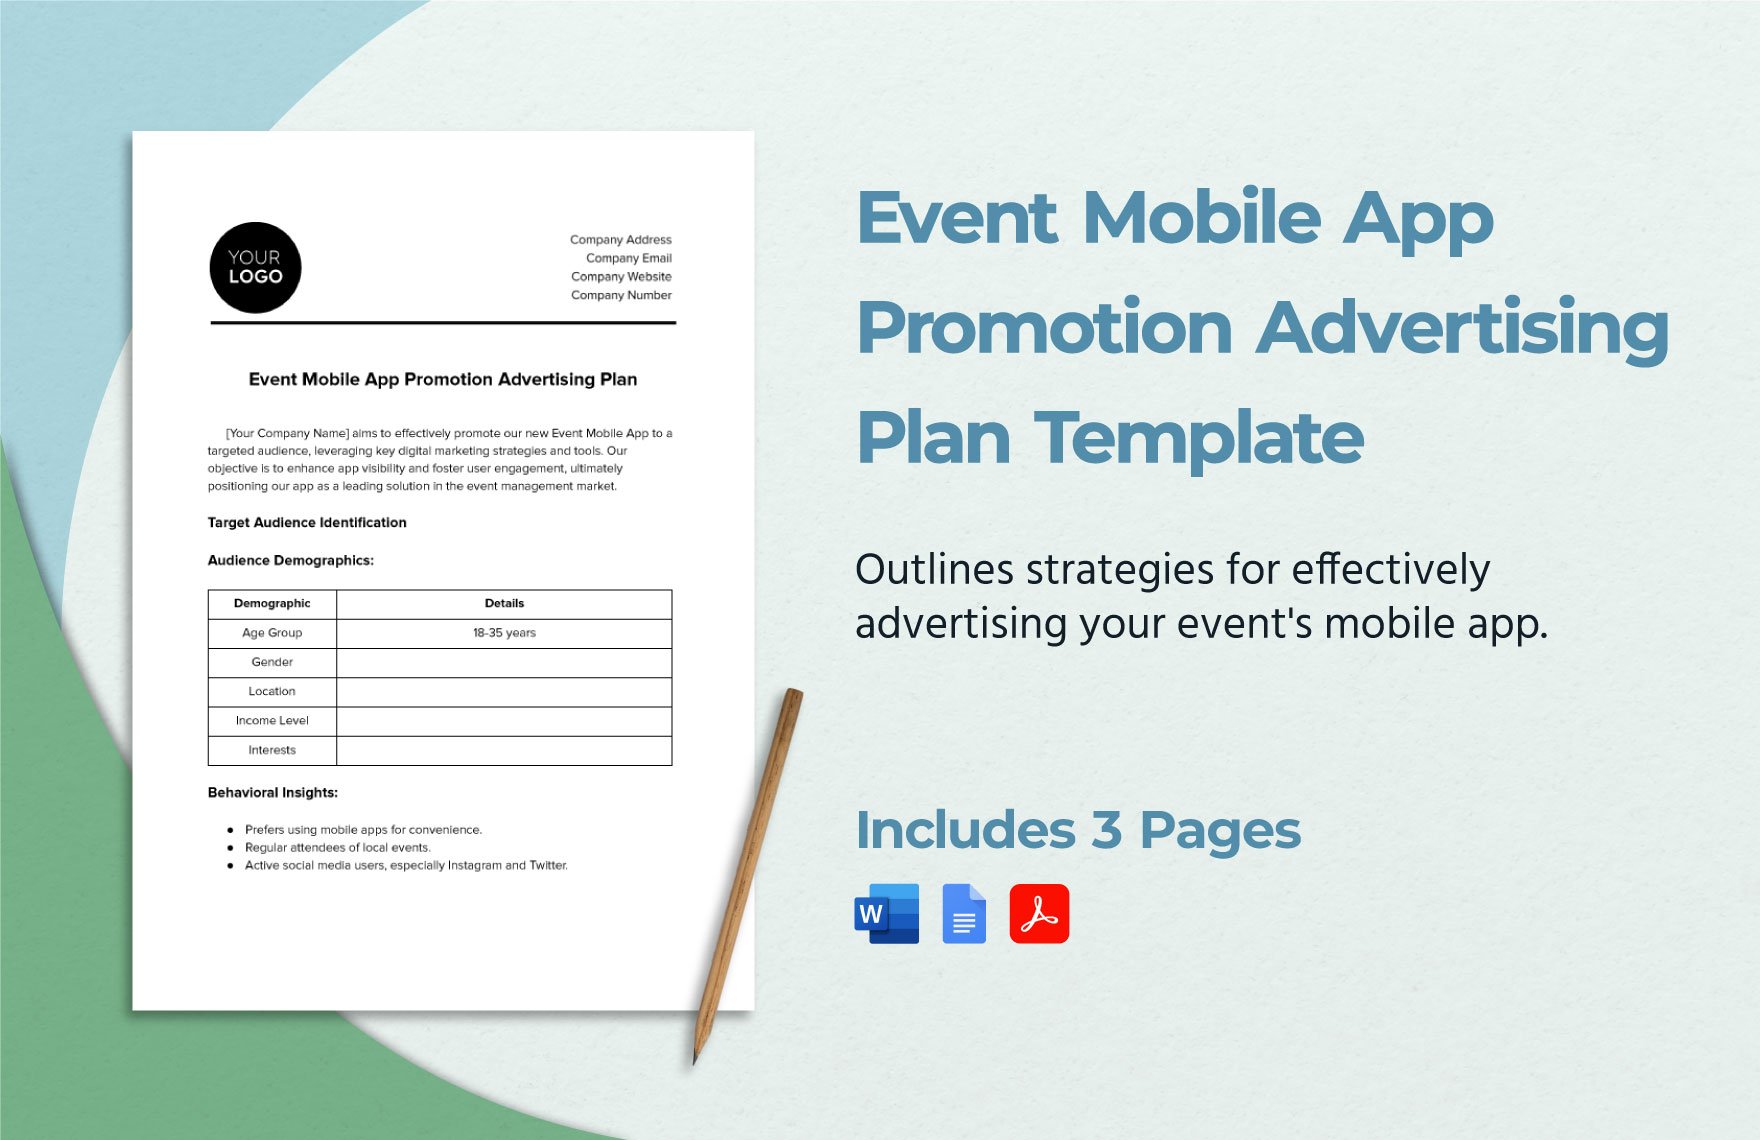 Event Mobile App Promotion Advertising Plan Template